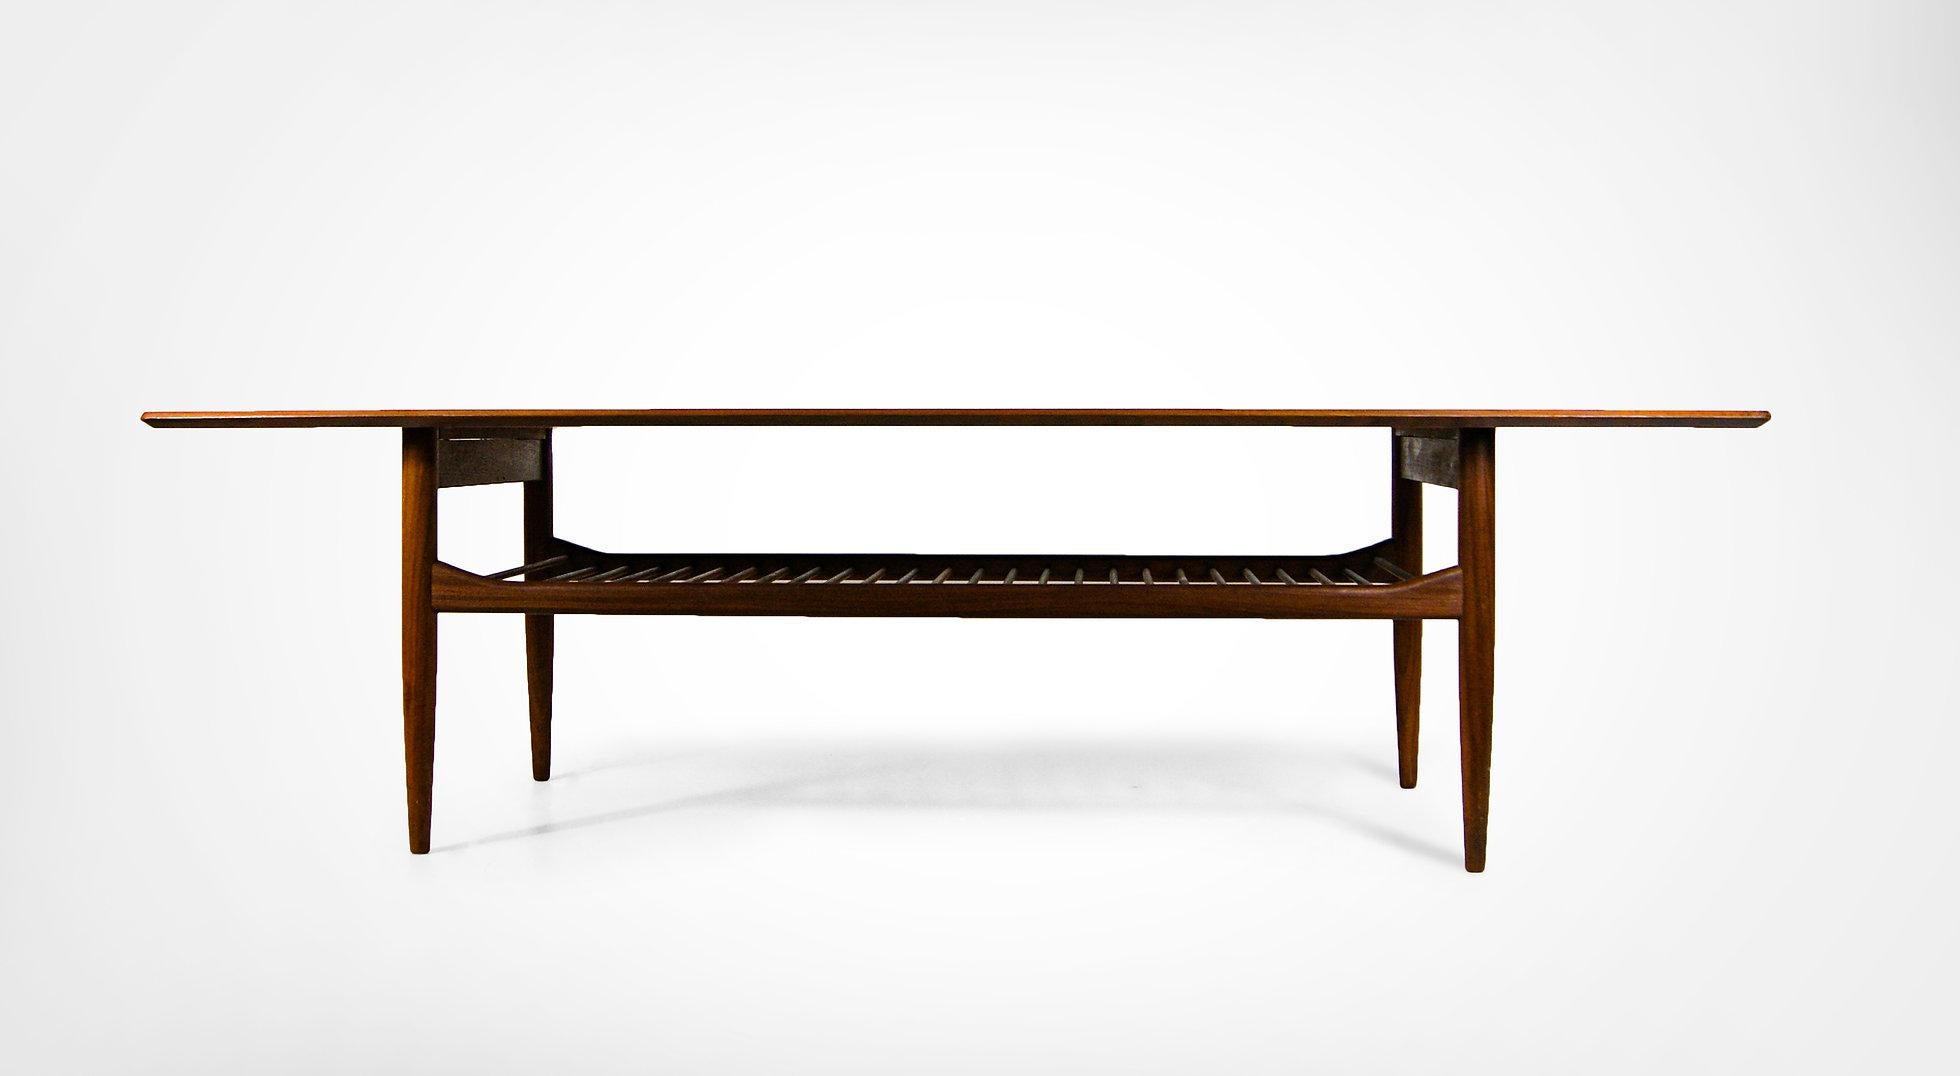 Mid-century large sized coffee table by Ib Kofod Larsen for G Plan.
Manufactured in the High Wycombe Buckinghamshire factory circa 1950s
Made of solid teak with beautiful patina.
Featuring a sleek chamfered detail to the edges.
With a magazine